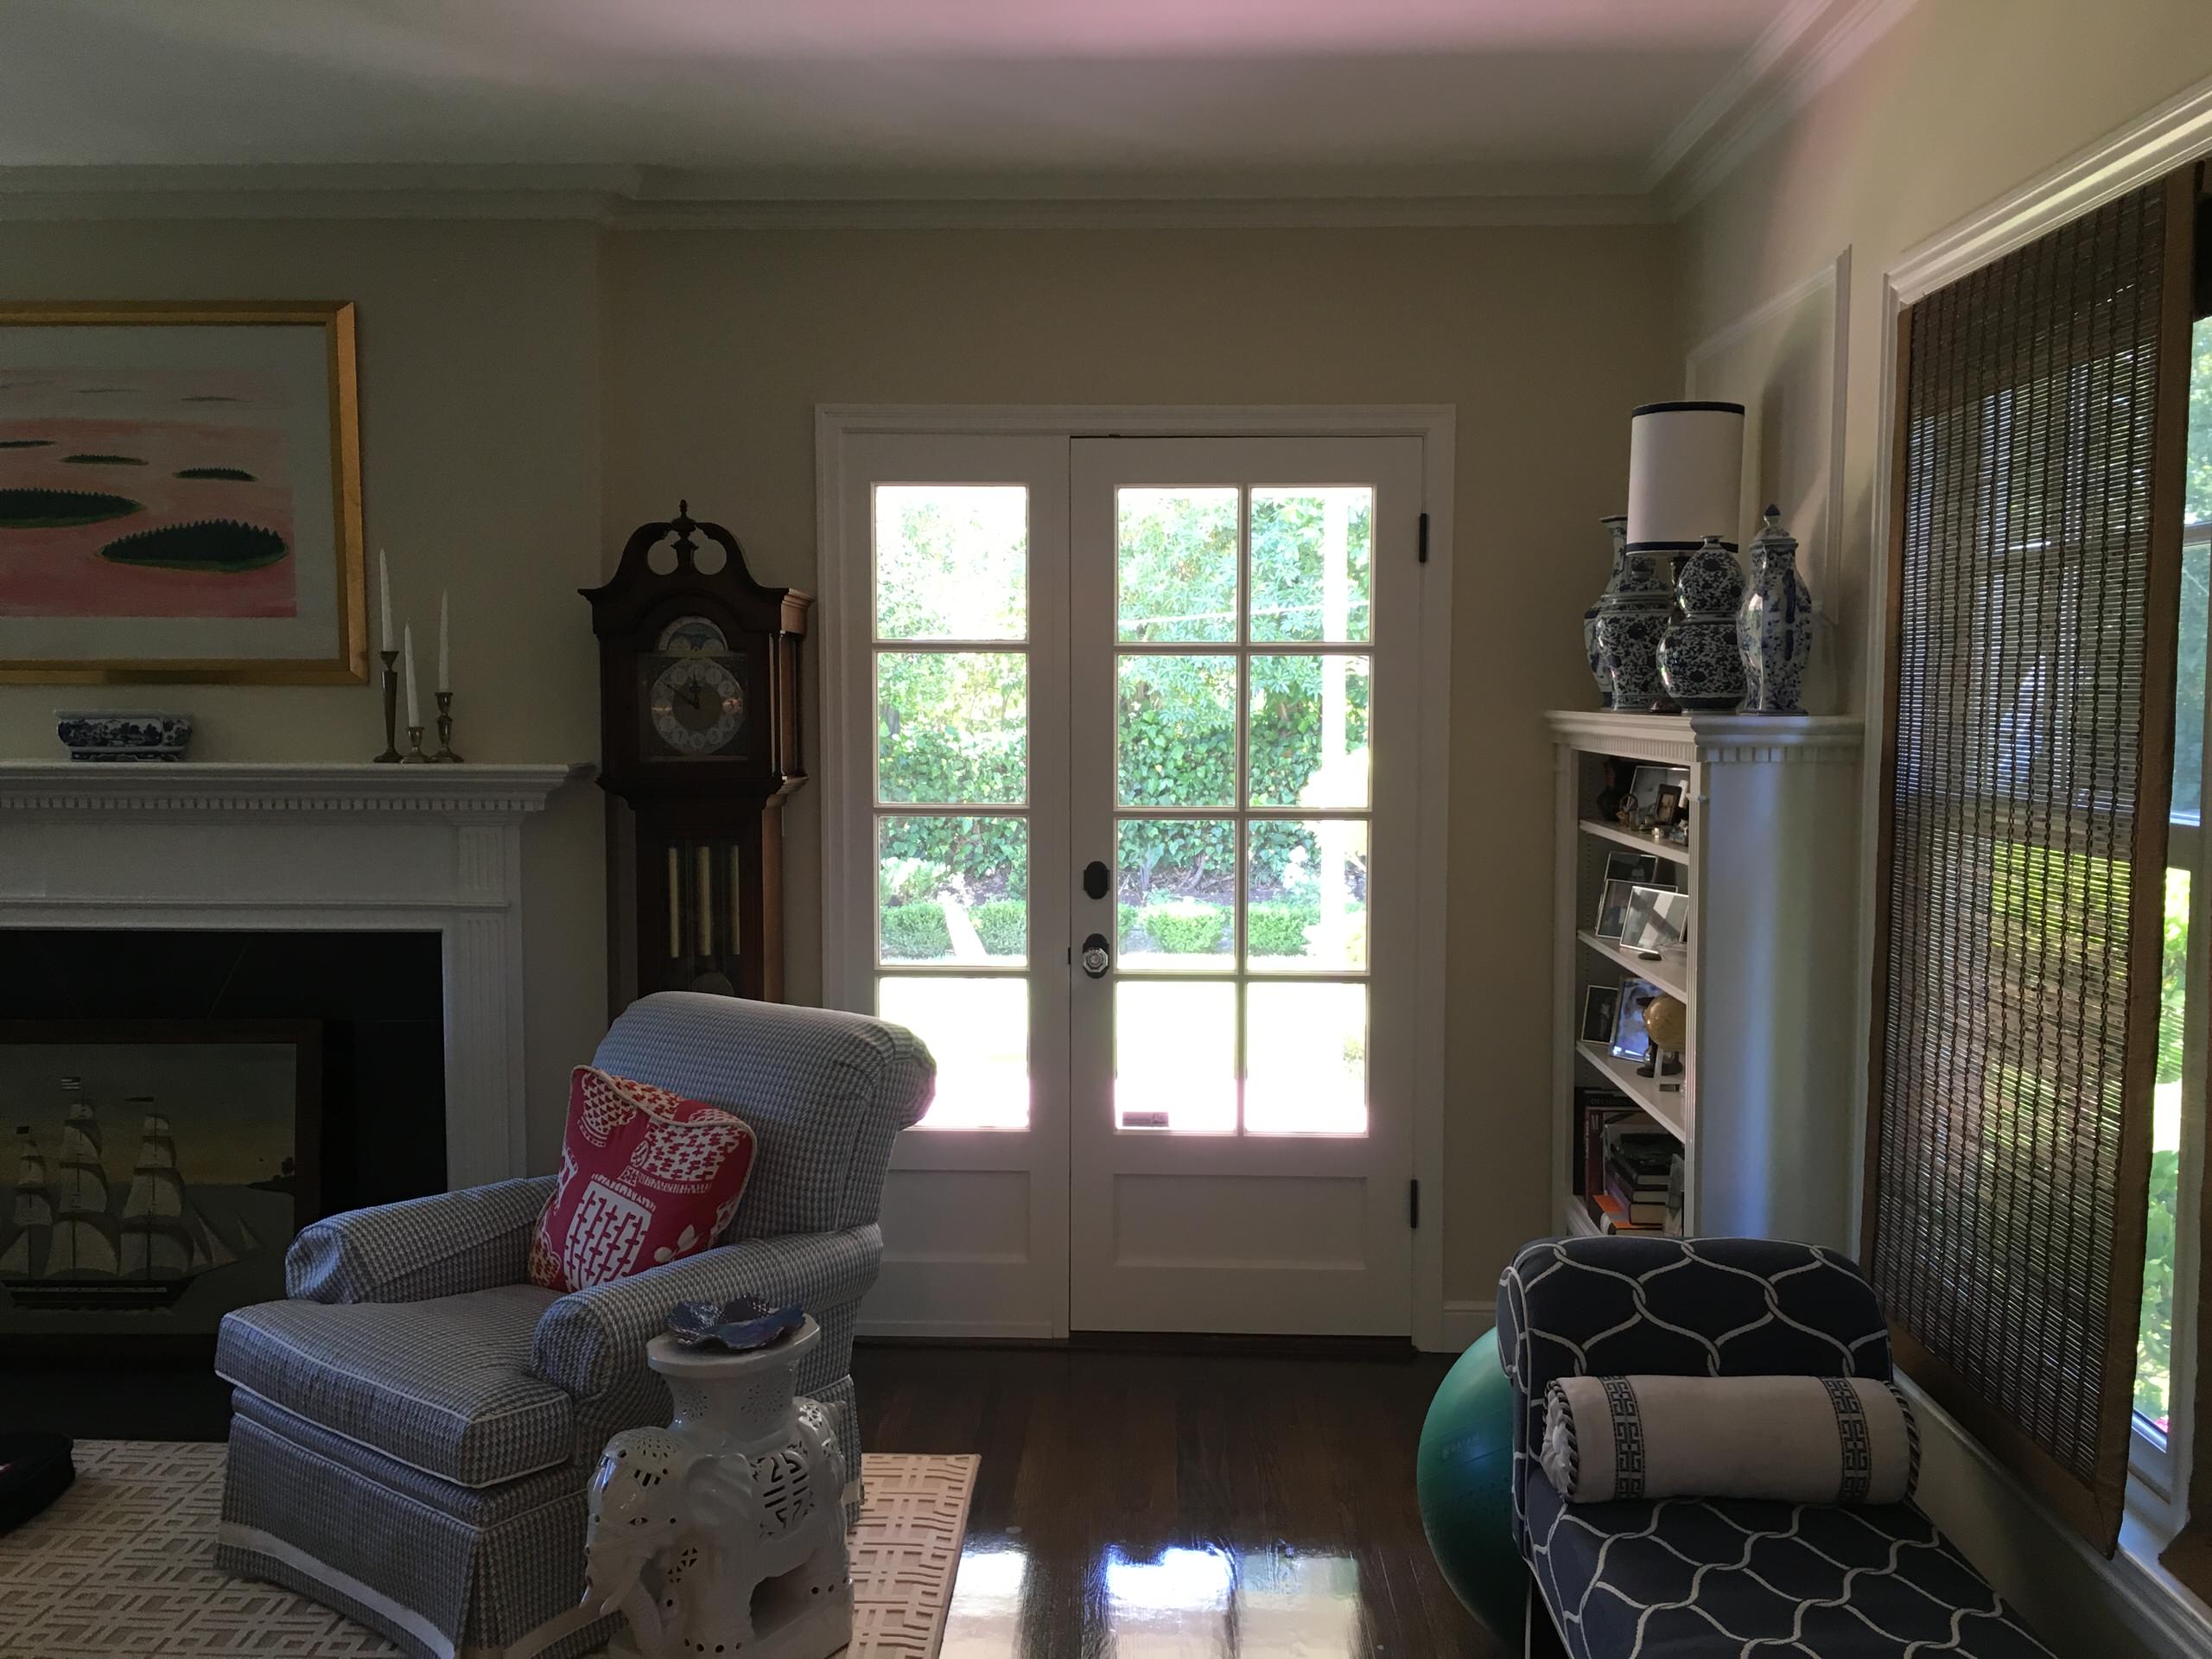 Colonial Revival - Living rm, before